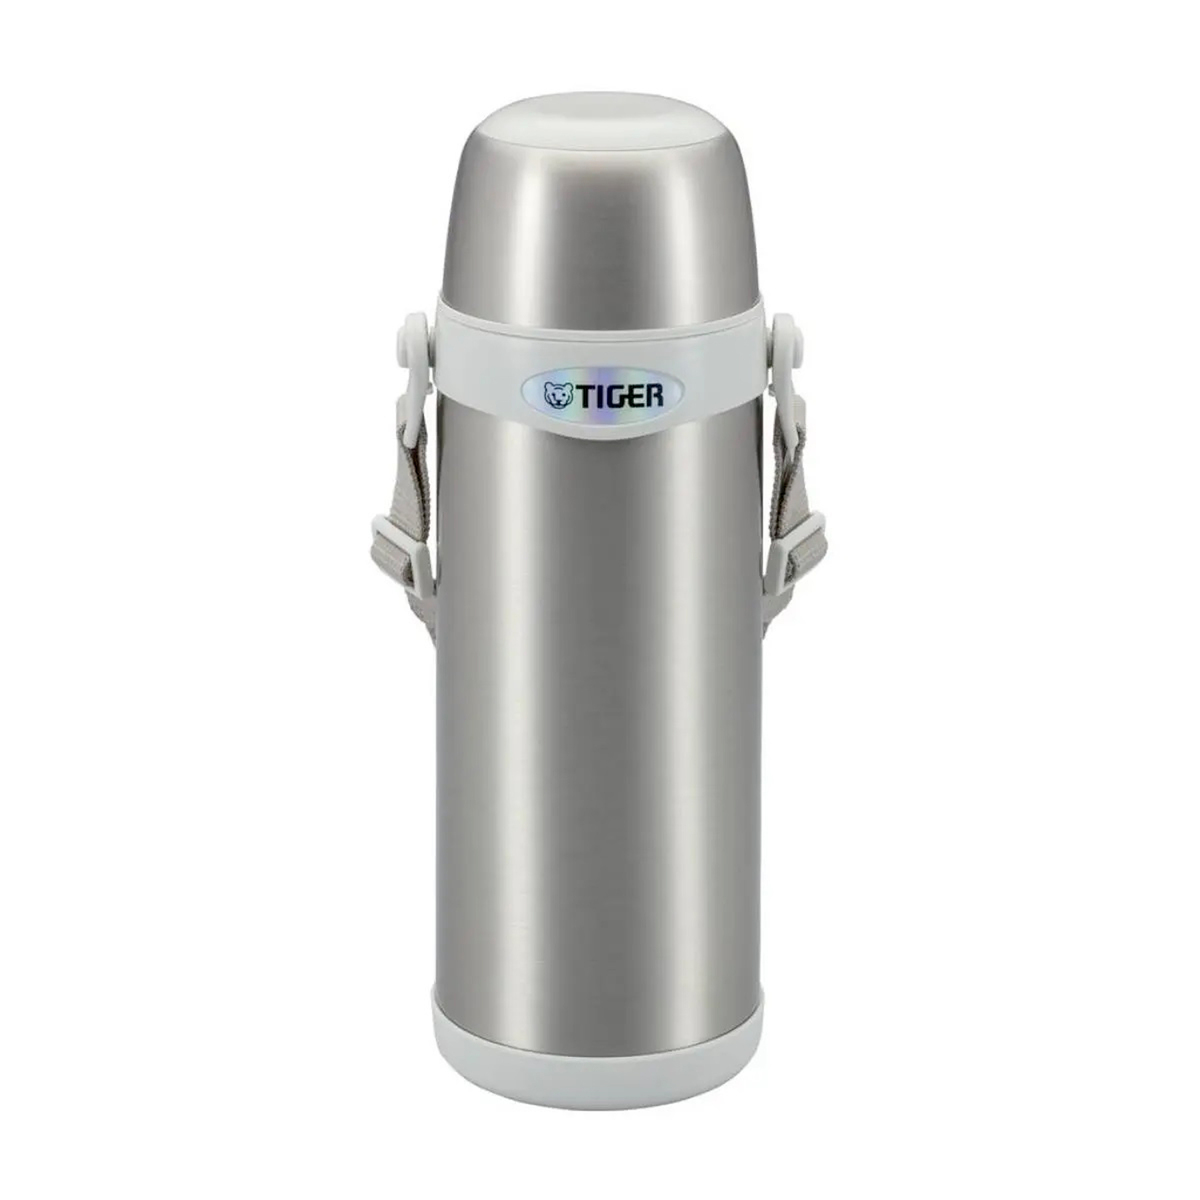 Tiger Stainless Steel Vaccum Flask, 1 L, MBI-A100